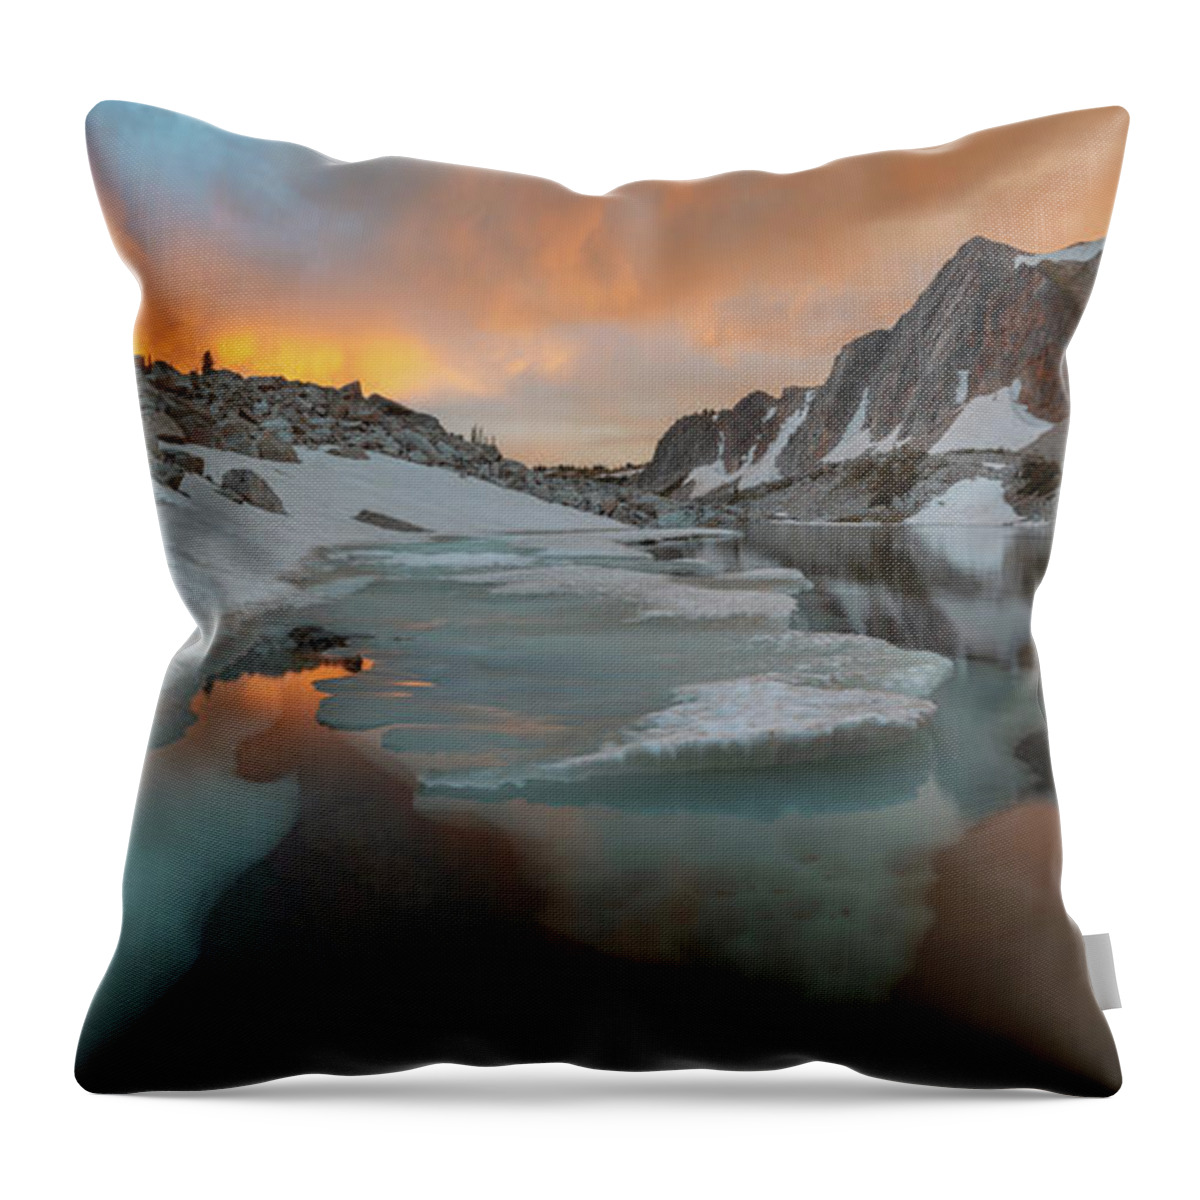 Wyoming Throw Pillow featuring the photograph Medicine Bow Peak by Dustin LeFevre